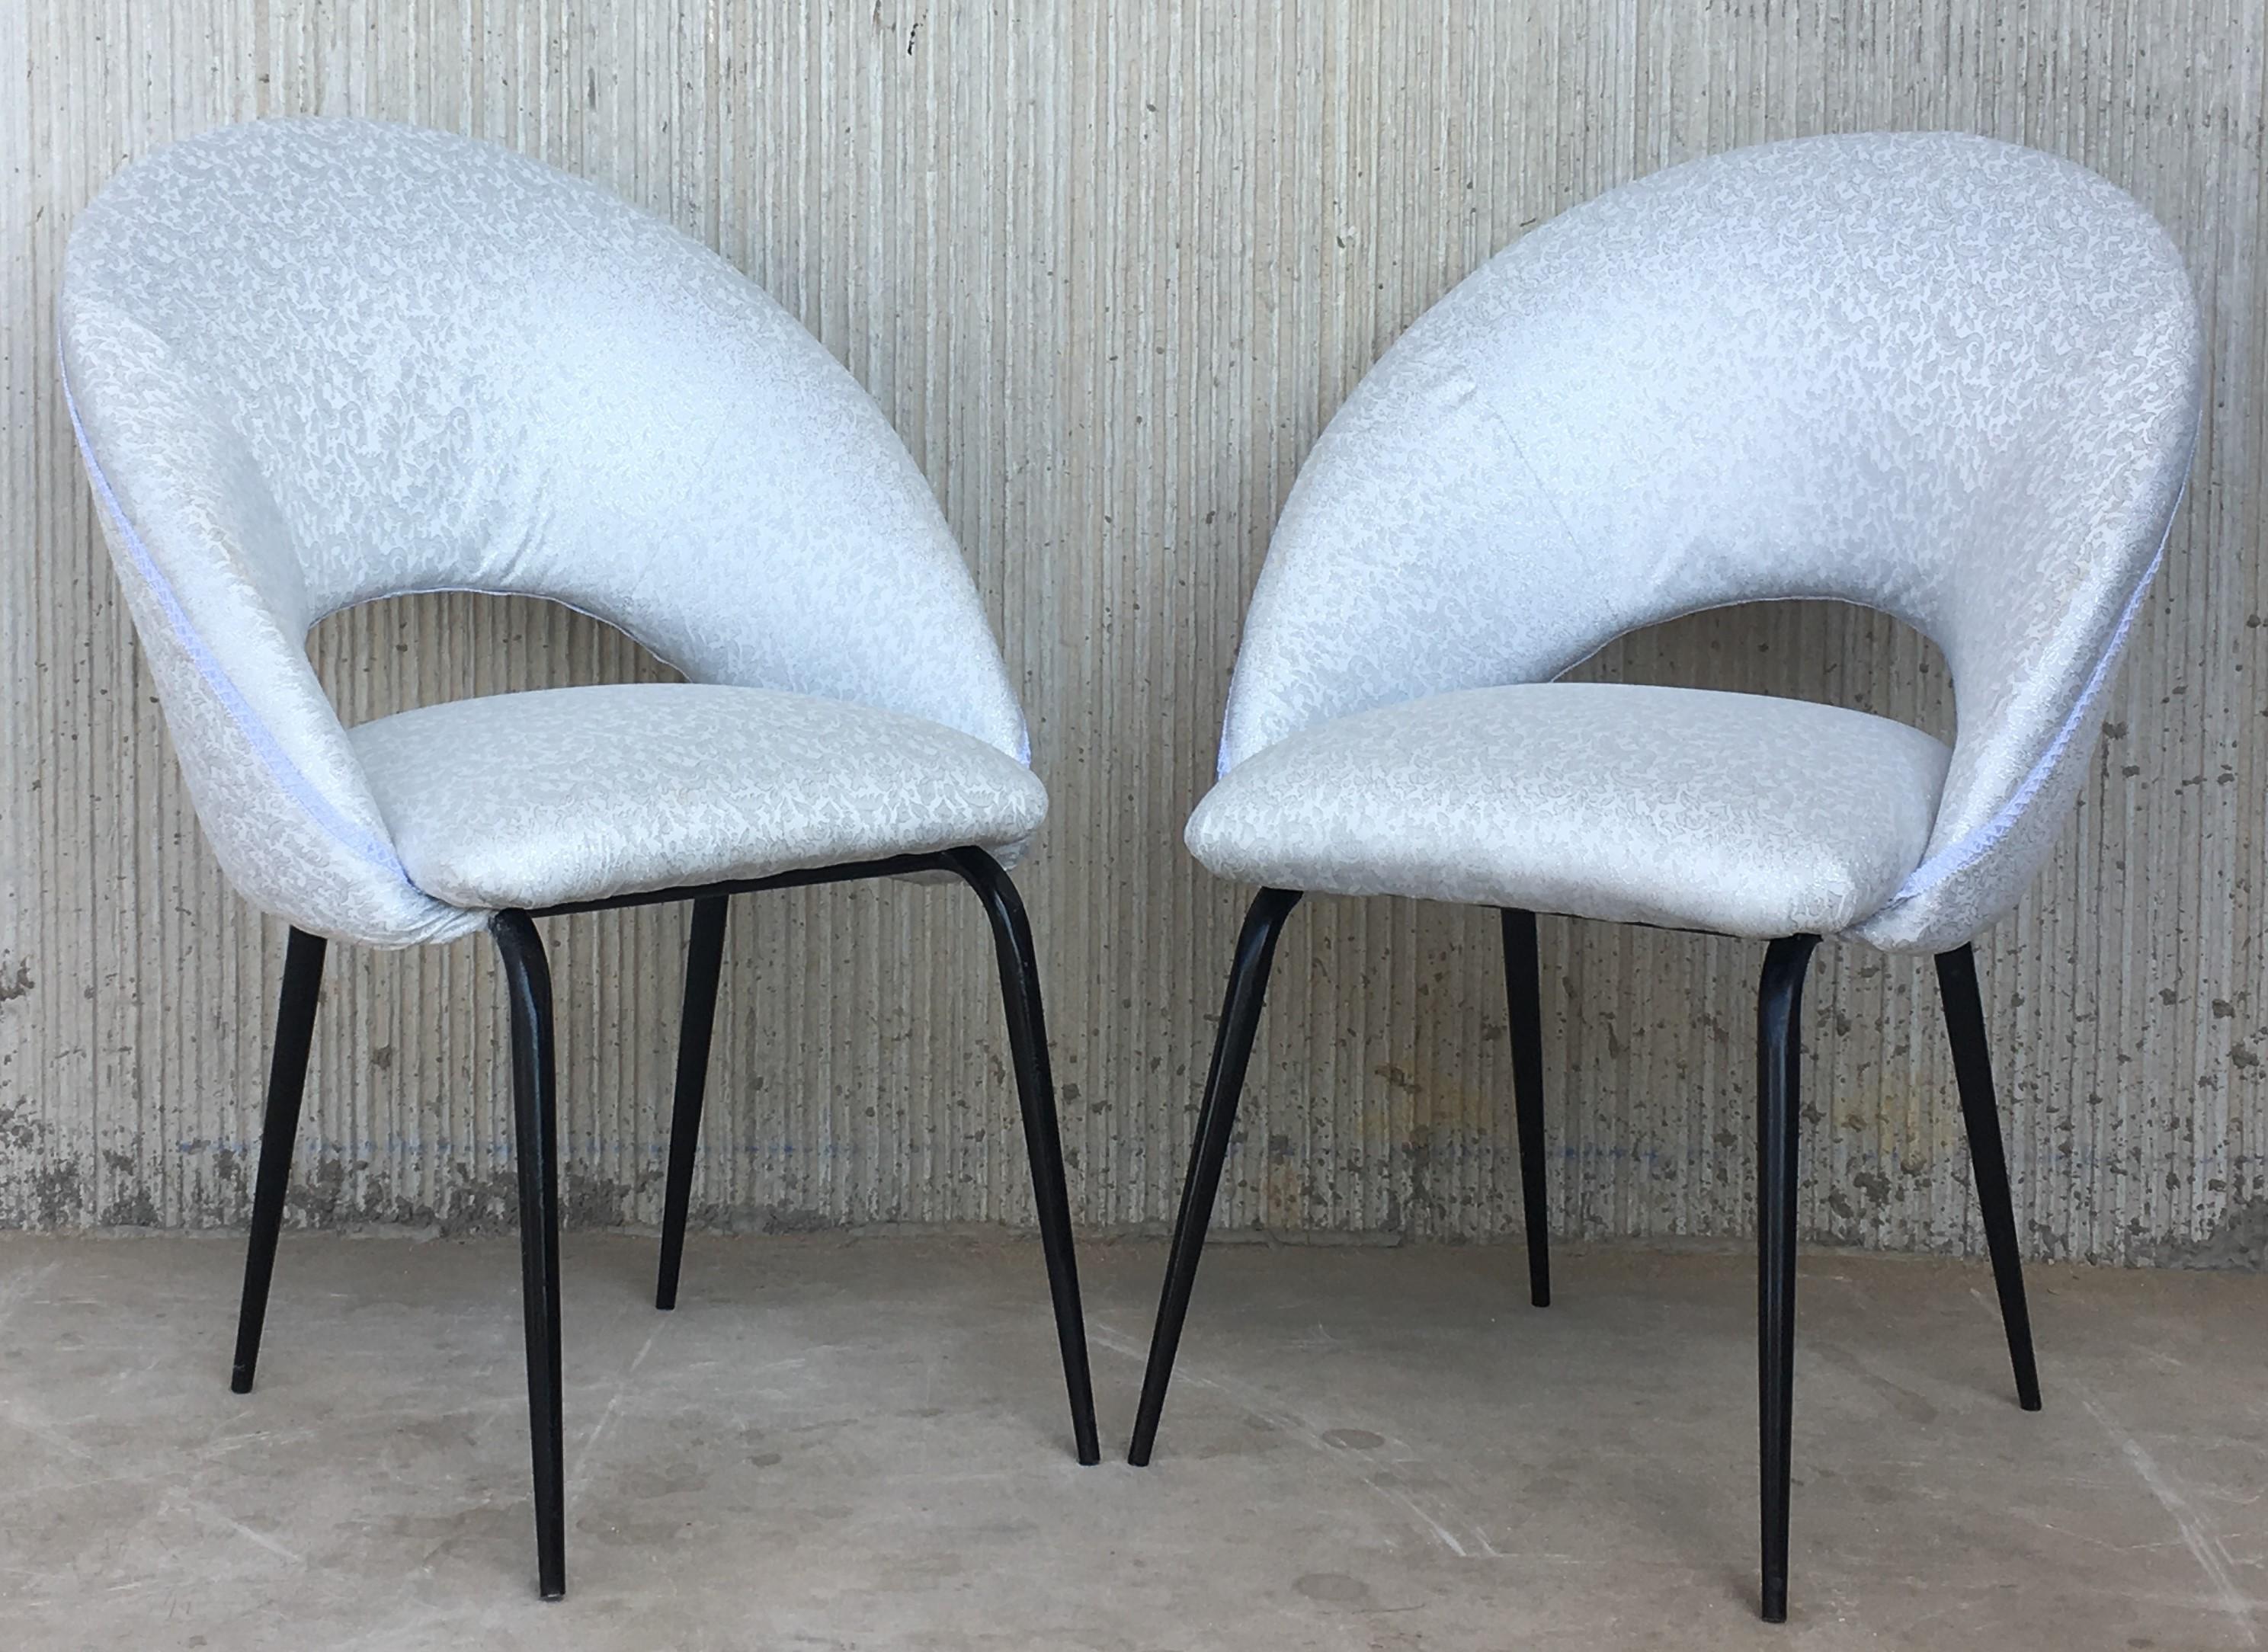 Midcentury Pair of Italian Chairs with Arched Seats and Arched Backrest (Moderne der Mitte des Jahrhunderts)